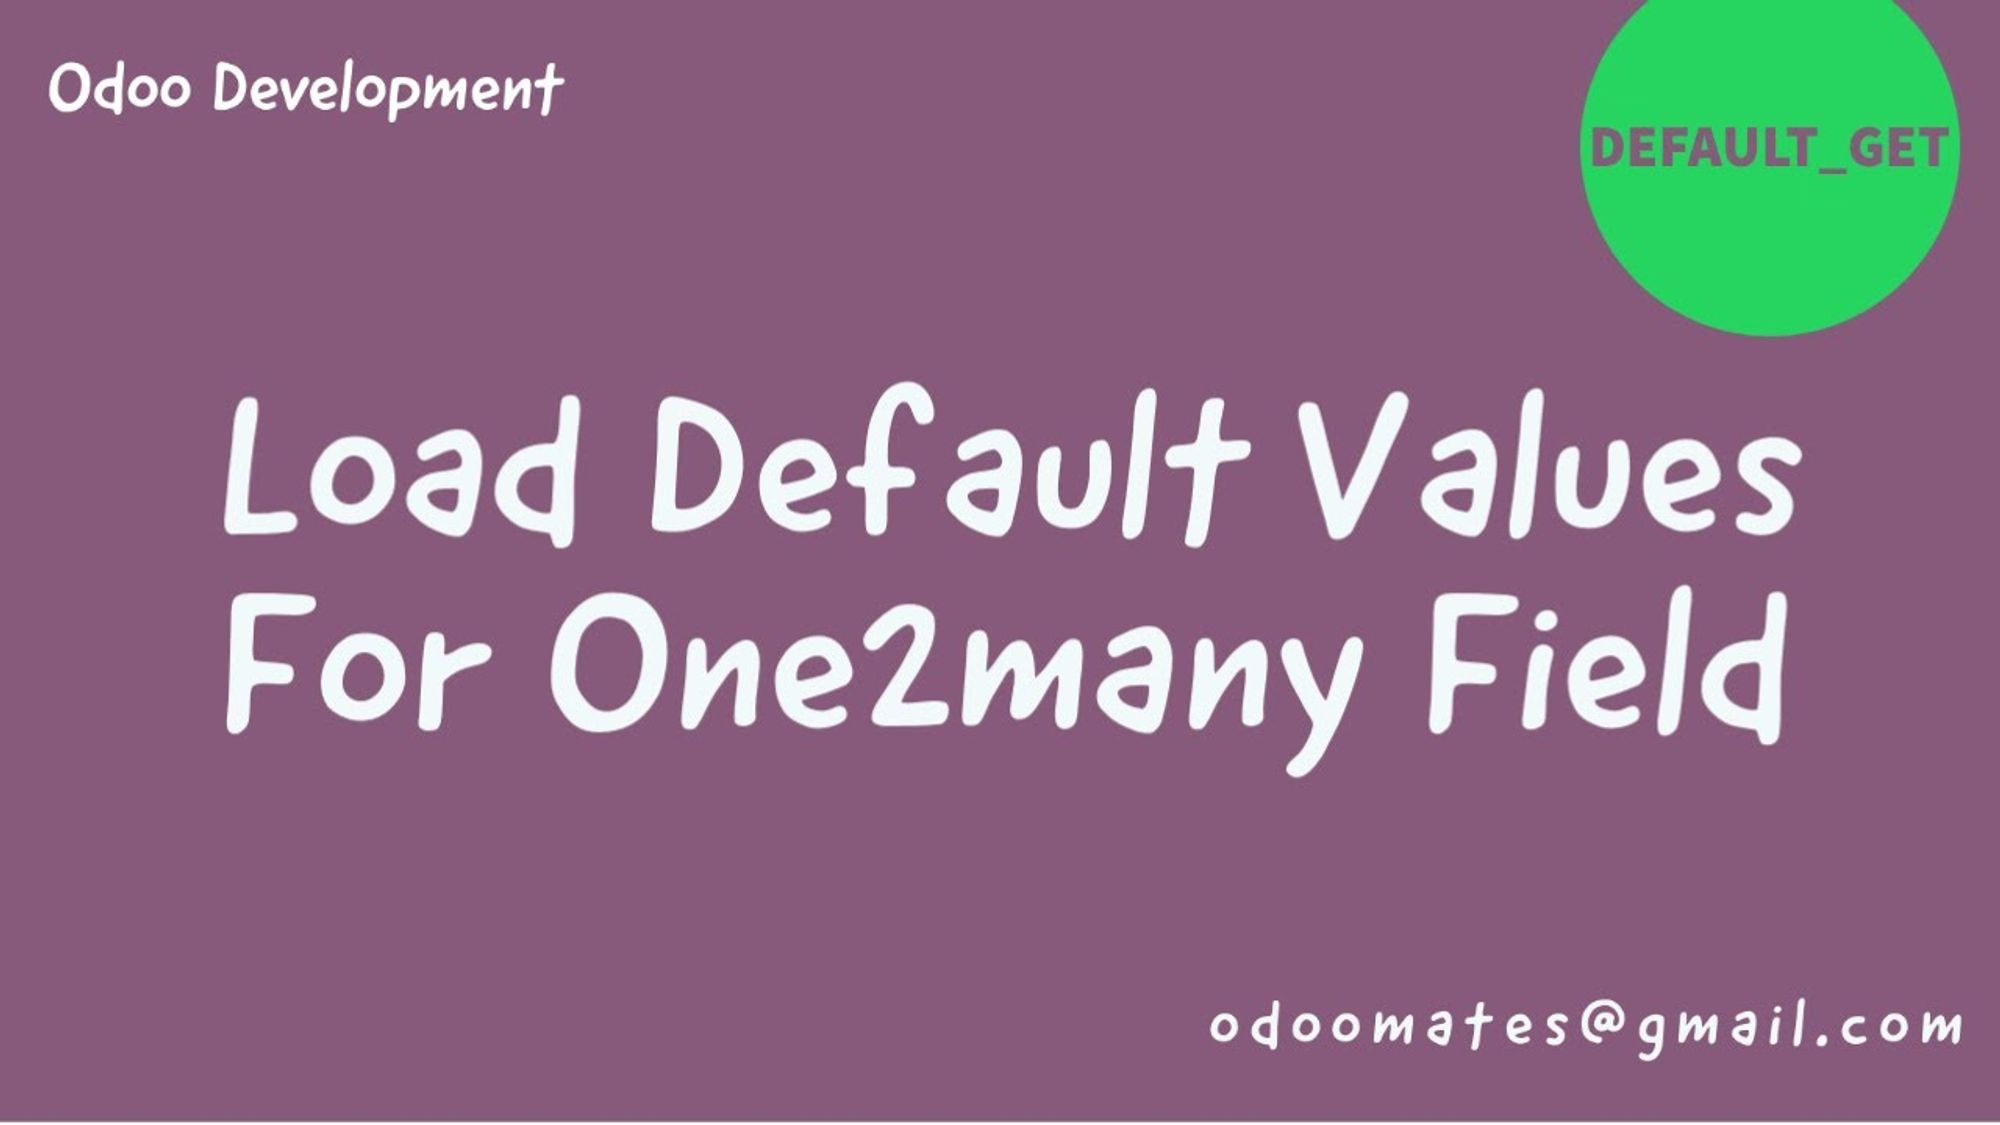 How To Load Default Values For One2many Fields in Odoo